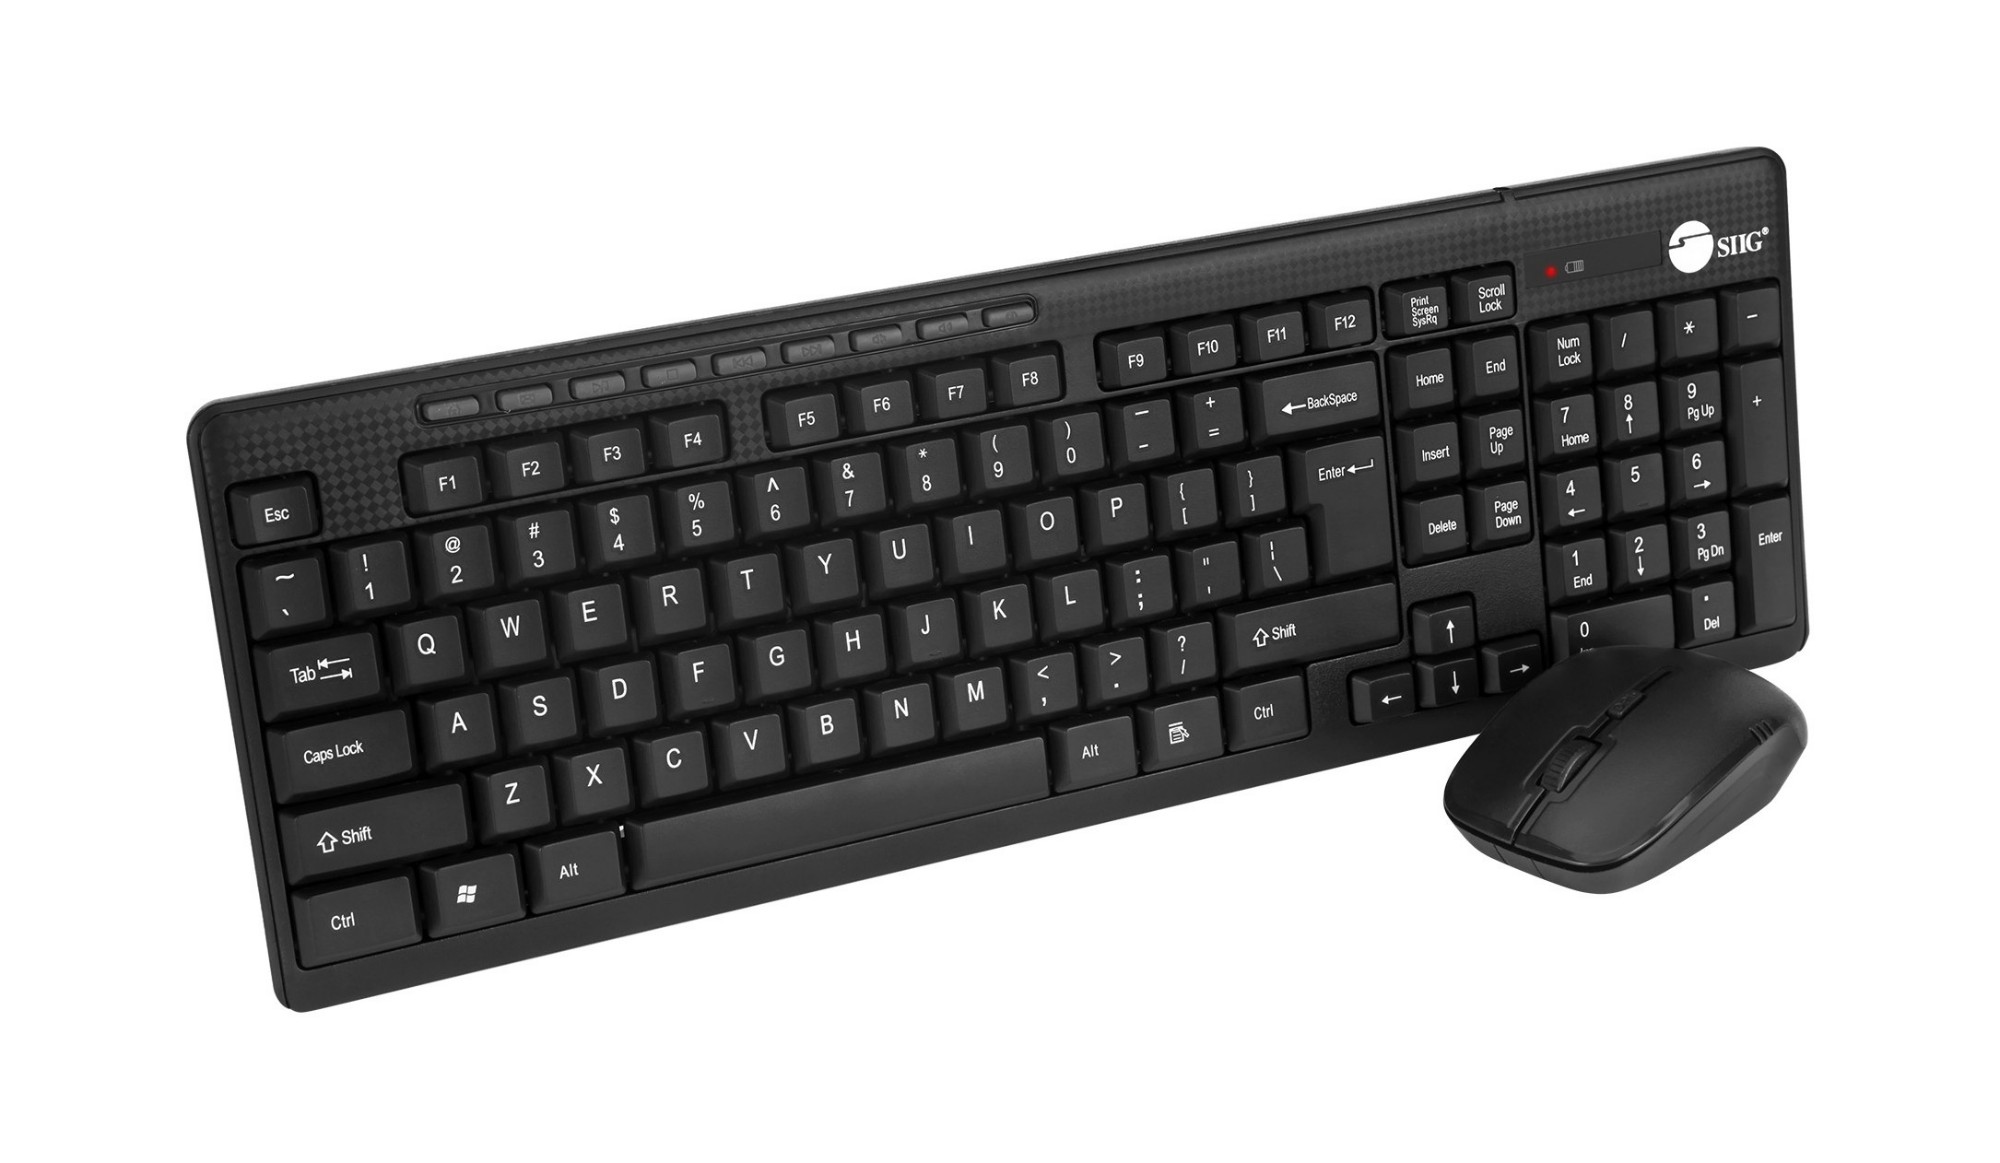 JK-WR0T12-S1 SIIG KM JK-WR0T12-S1 Wireless Extra-Duo 102-key Keyboard & 3-button Mouse RTL